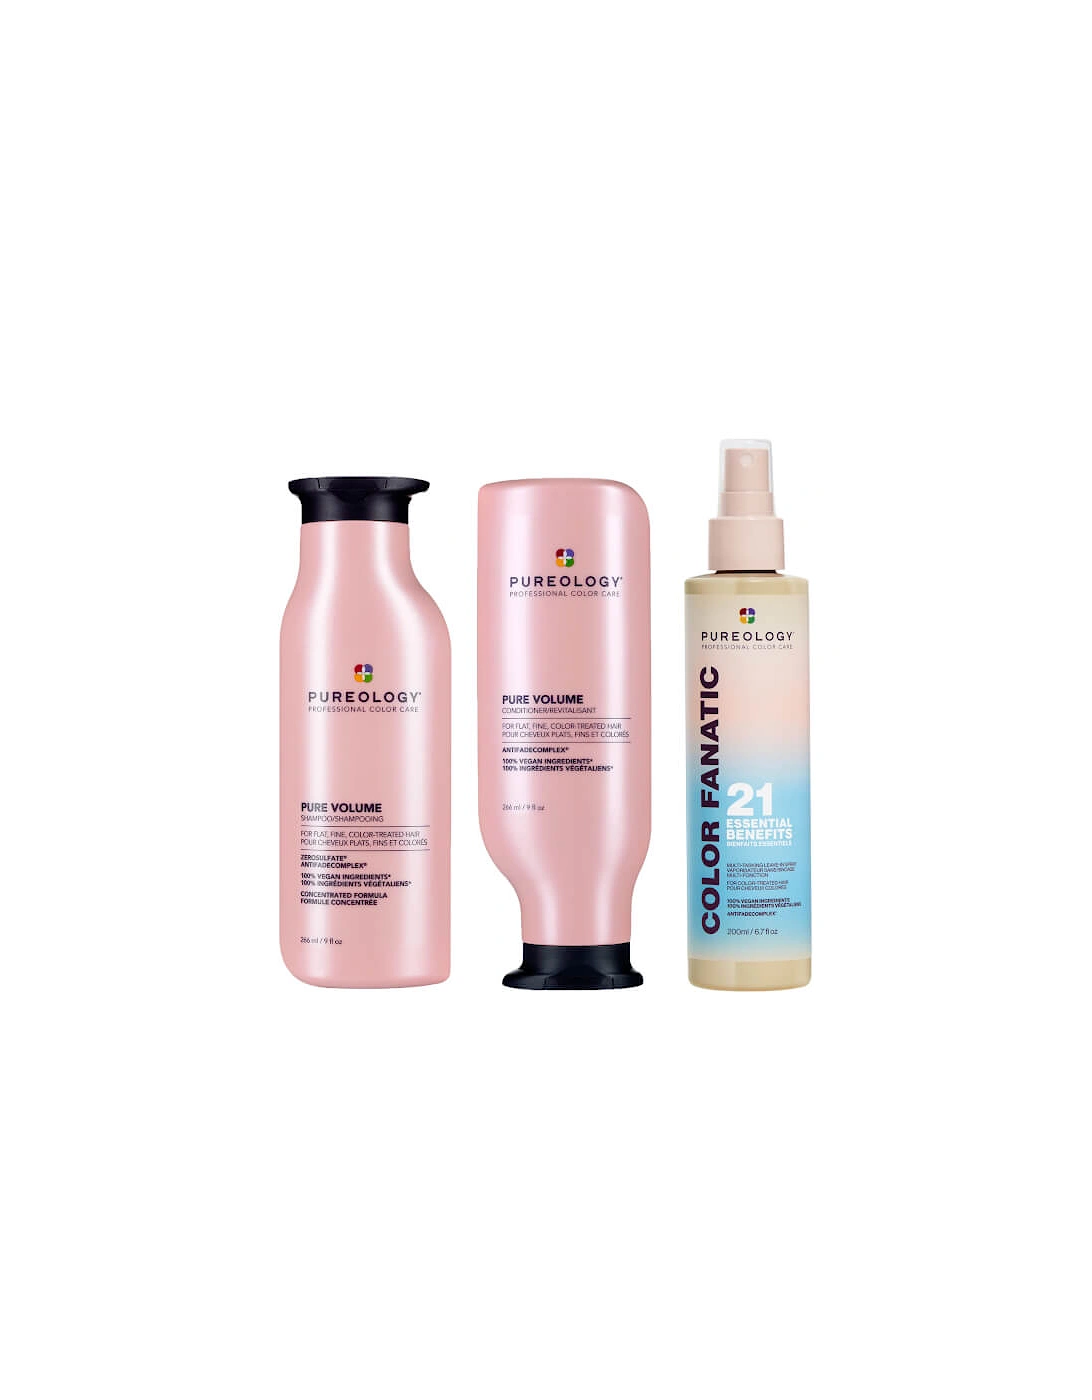 Pure Volume Shampoo, Conditioner and Color Fanatic Spray Routine for Flat and Fine Hair, 2 of 1